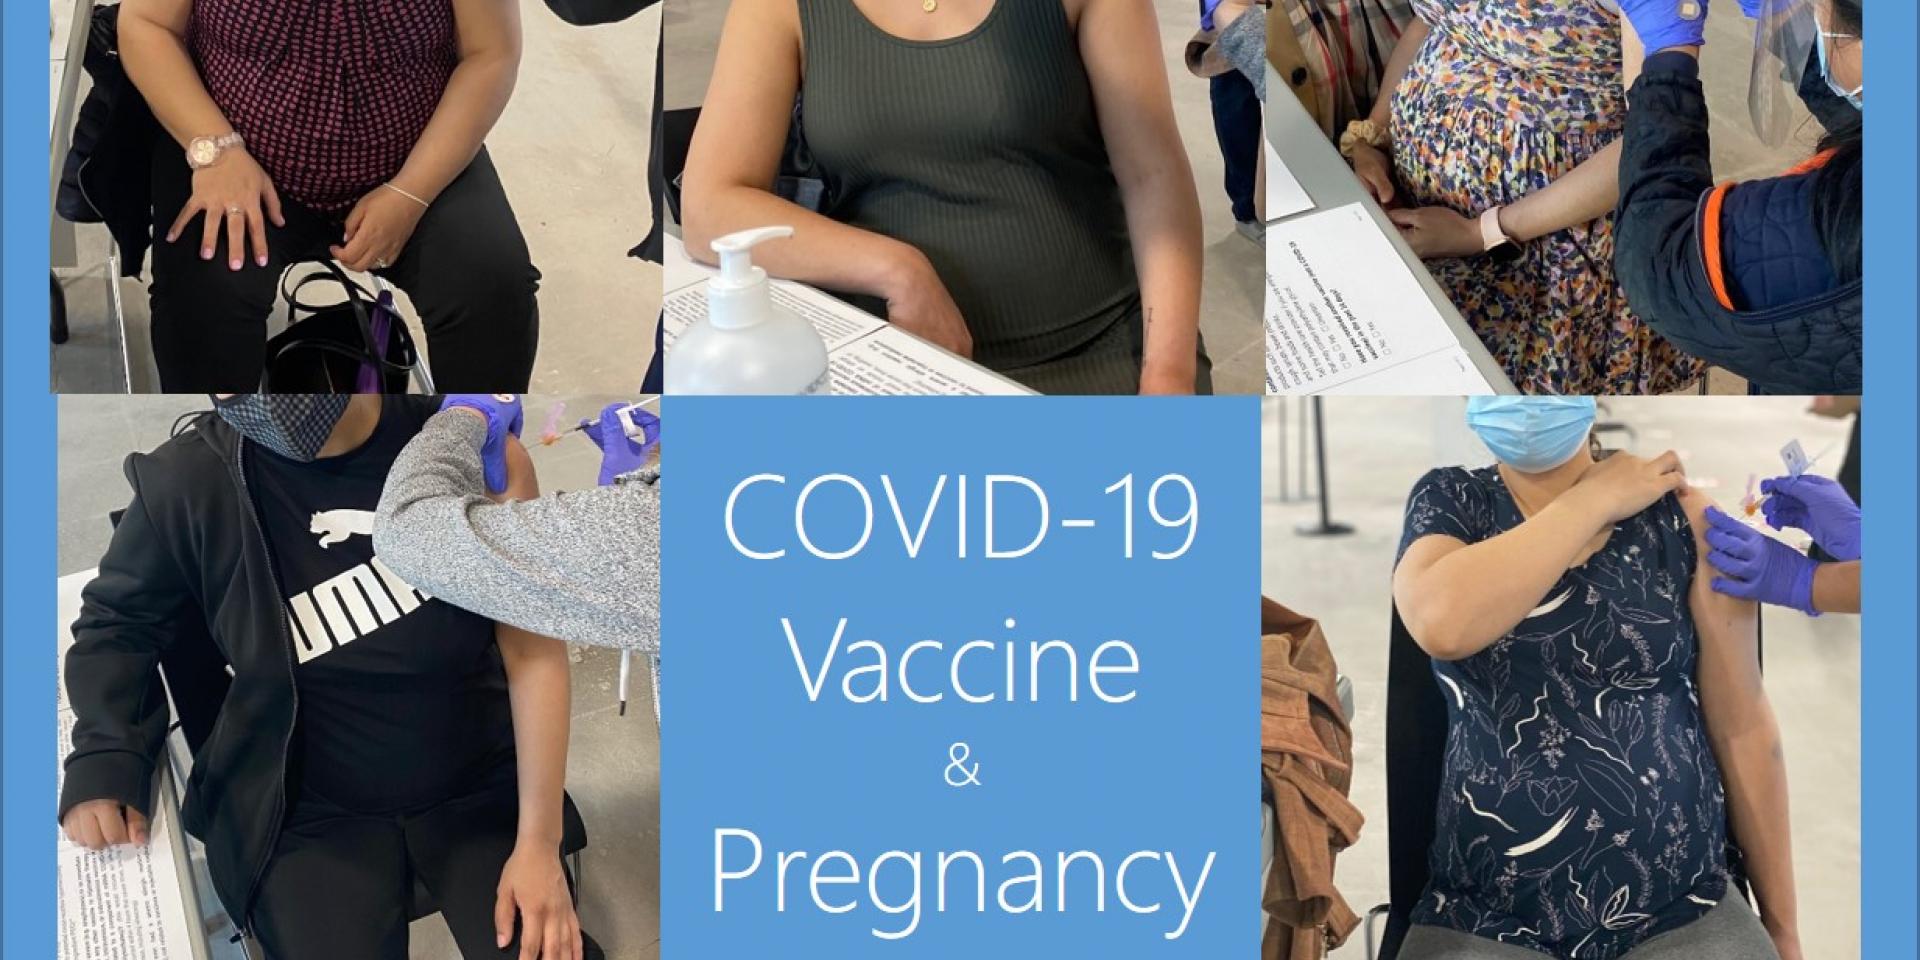 Collage of pregnant clients receiving the COVID-19 vaccine